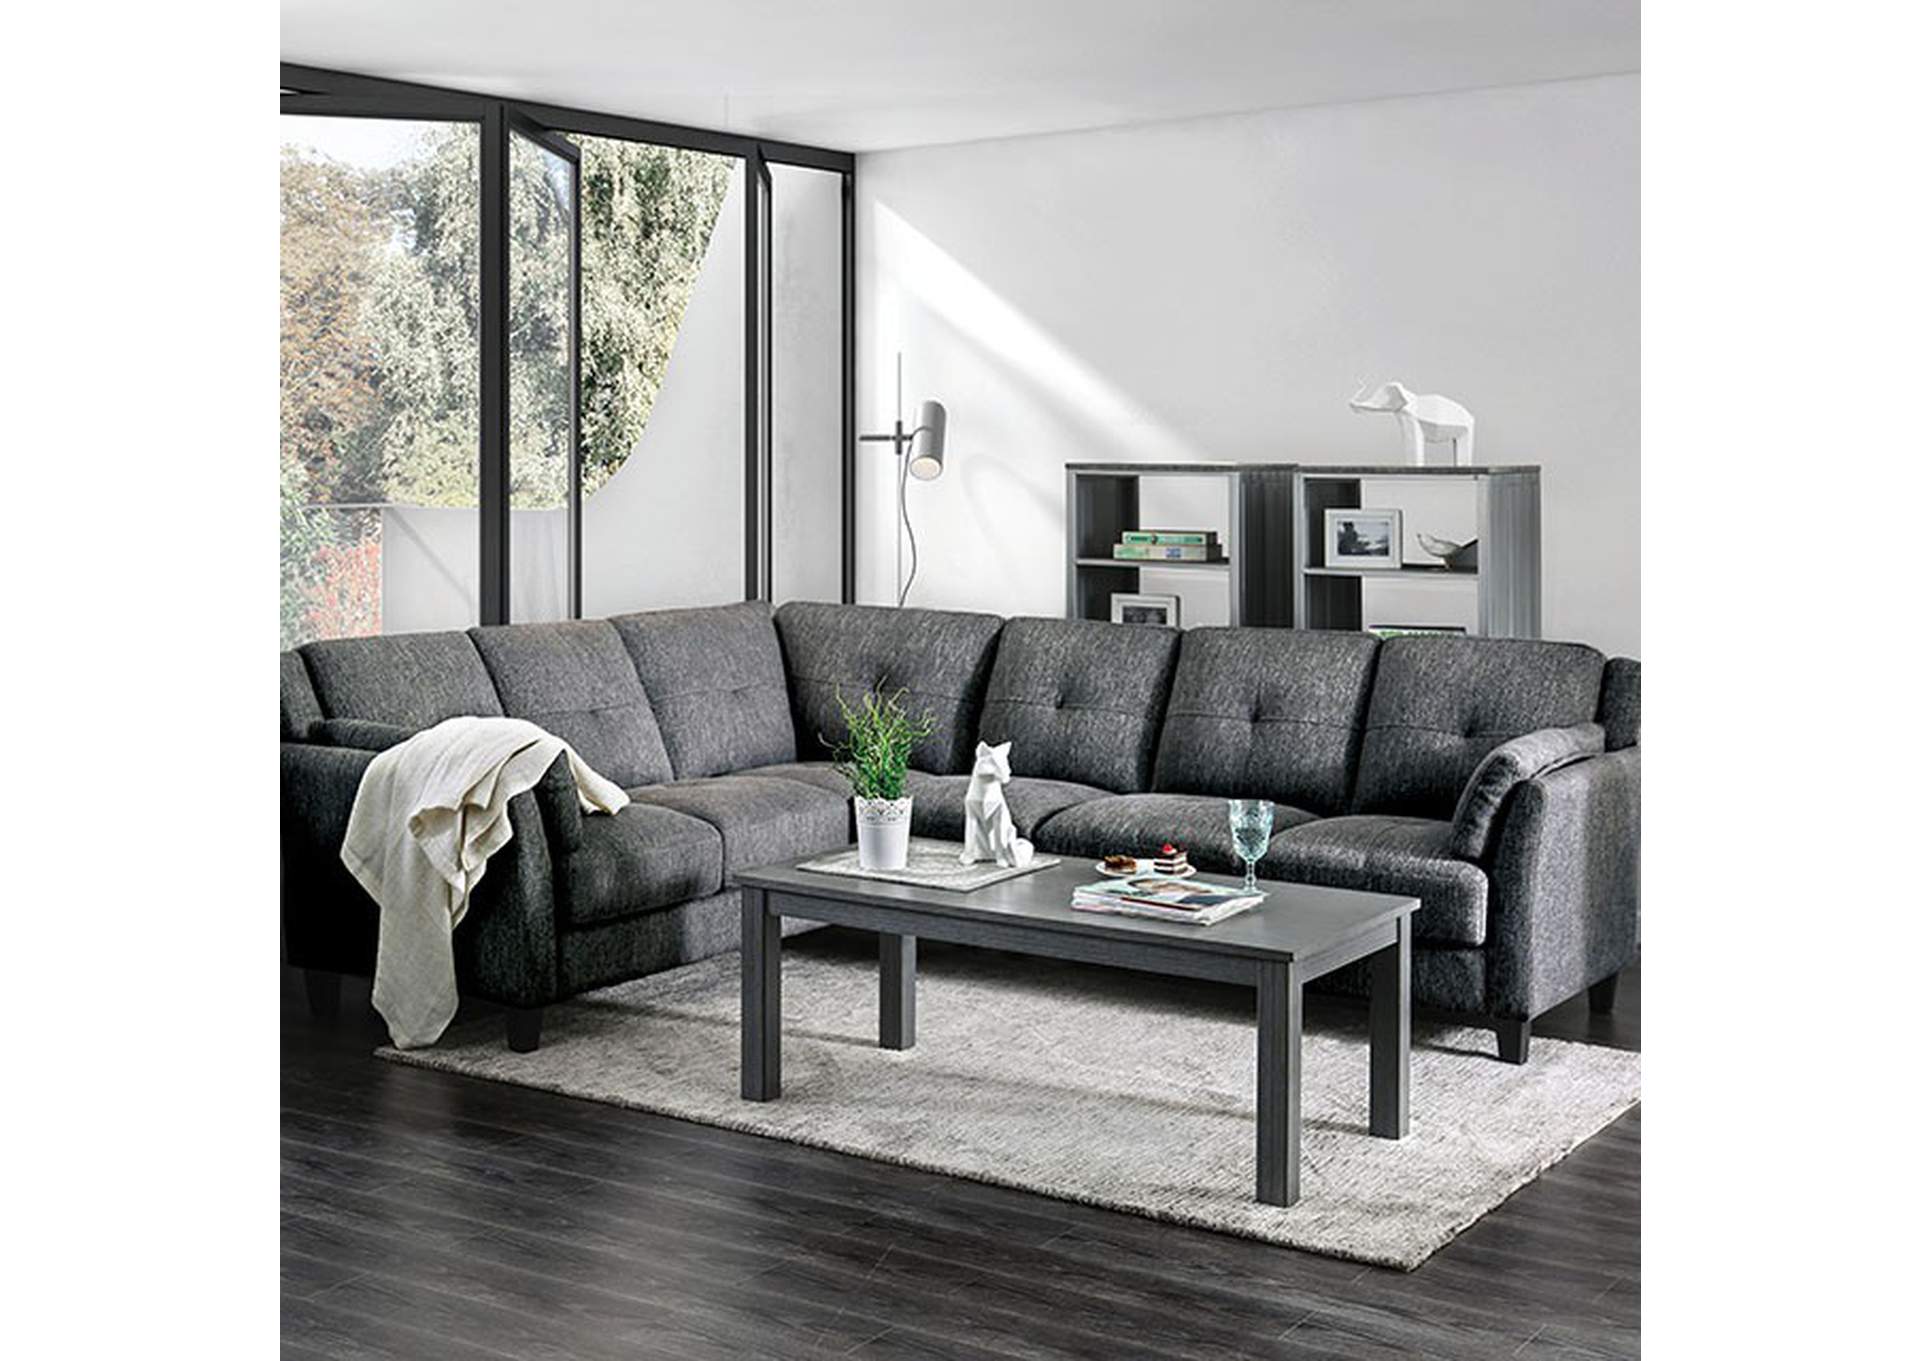 Kaleigh Sectional,Furniture of America